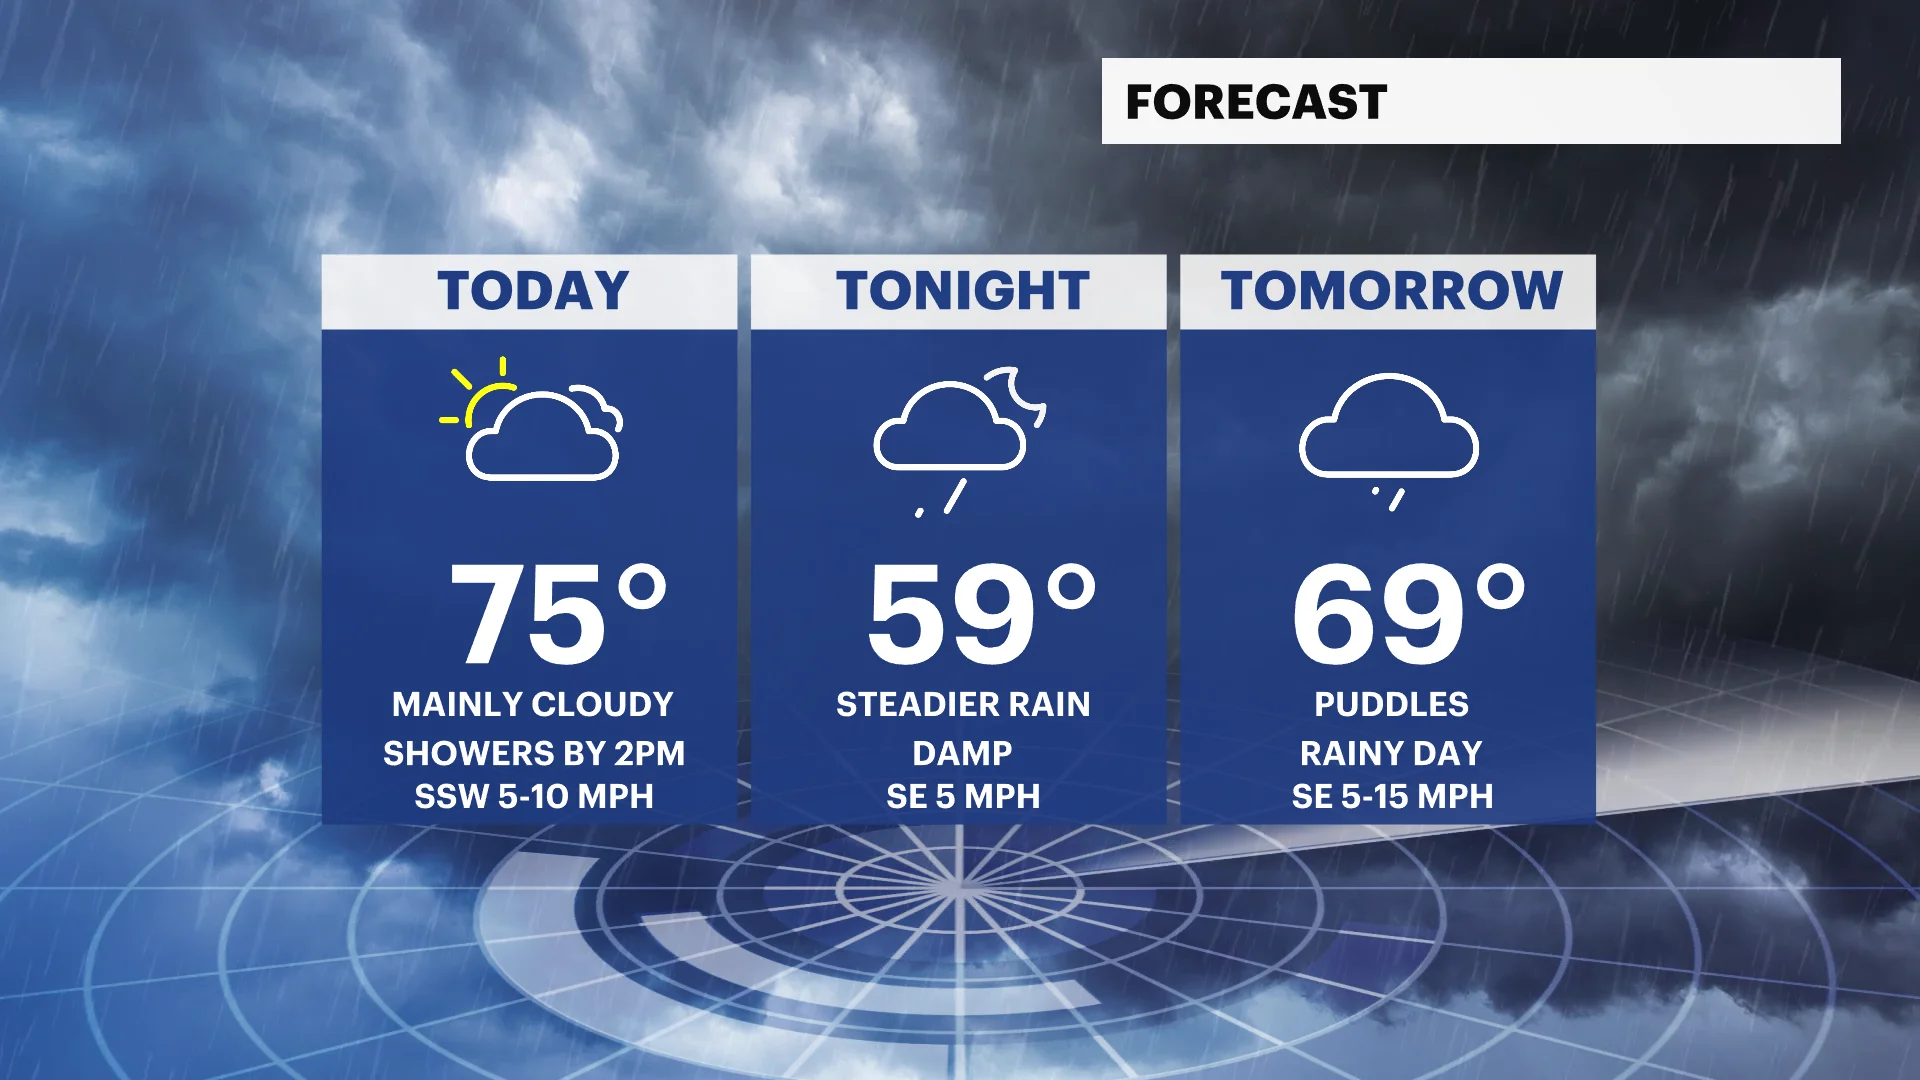 STORM WATCH: Mix of sun and clouds before midday rain showers in New Jersey